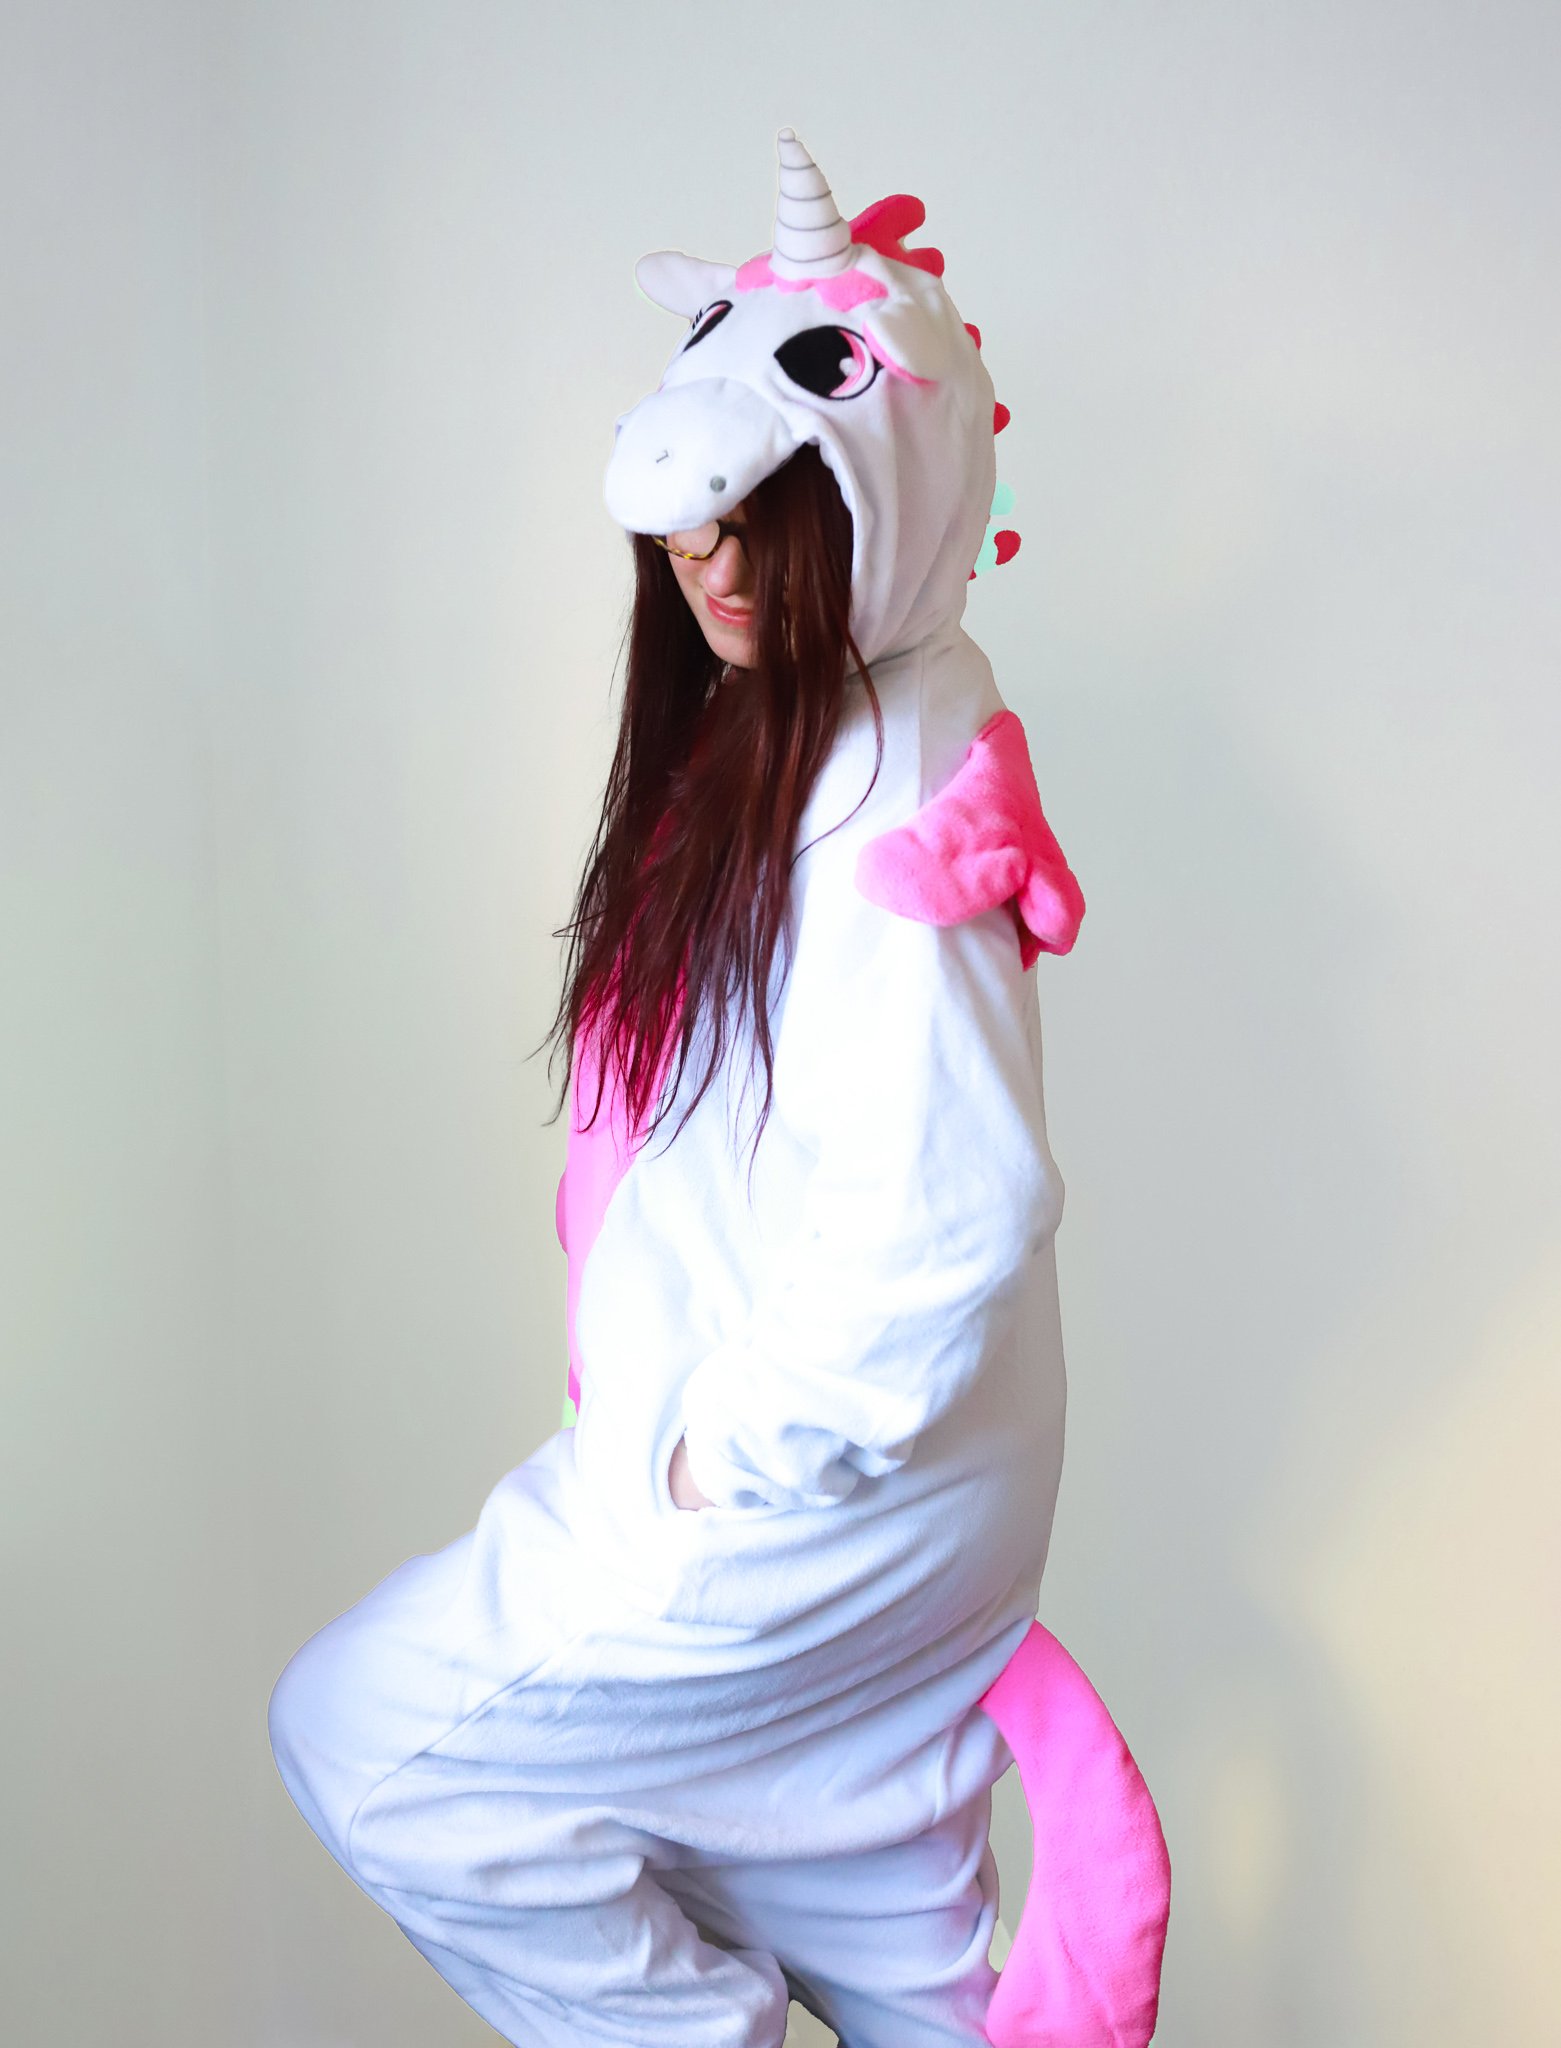 Large (Height 160-177 CM / 5'5-5'10) Official ONESIE Merch